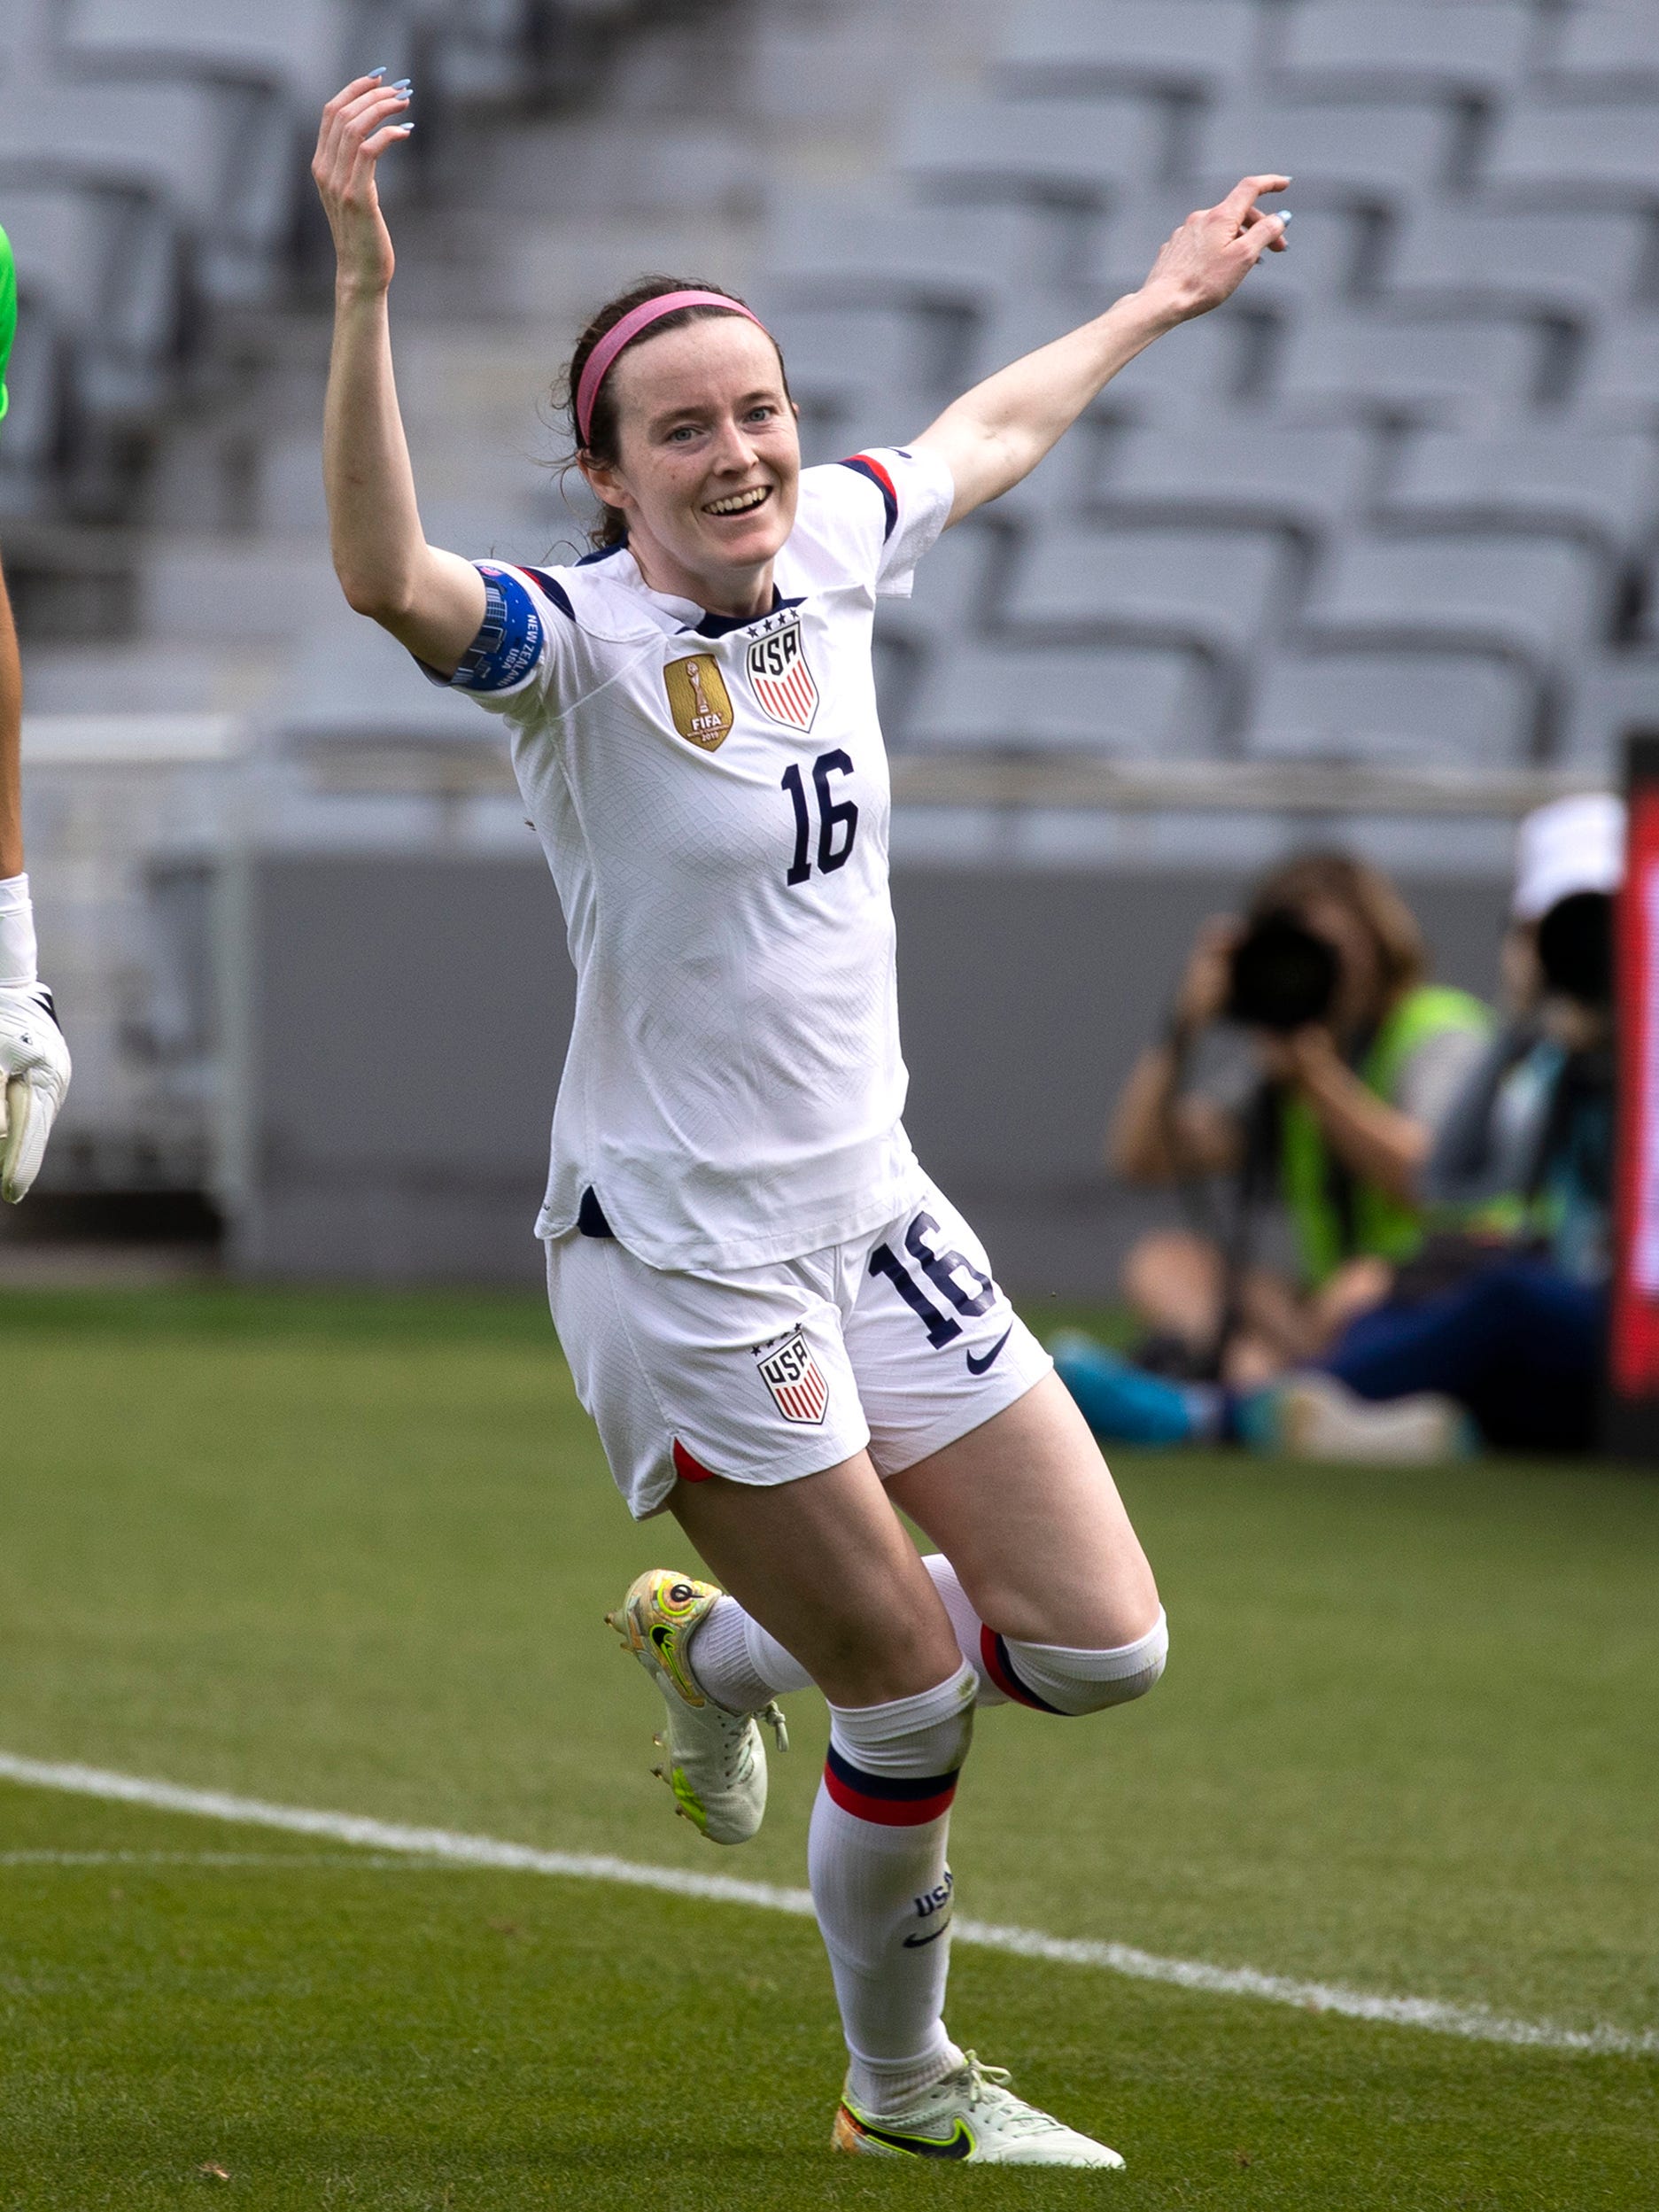 An action image of Rose Lavelle playing soccer.